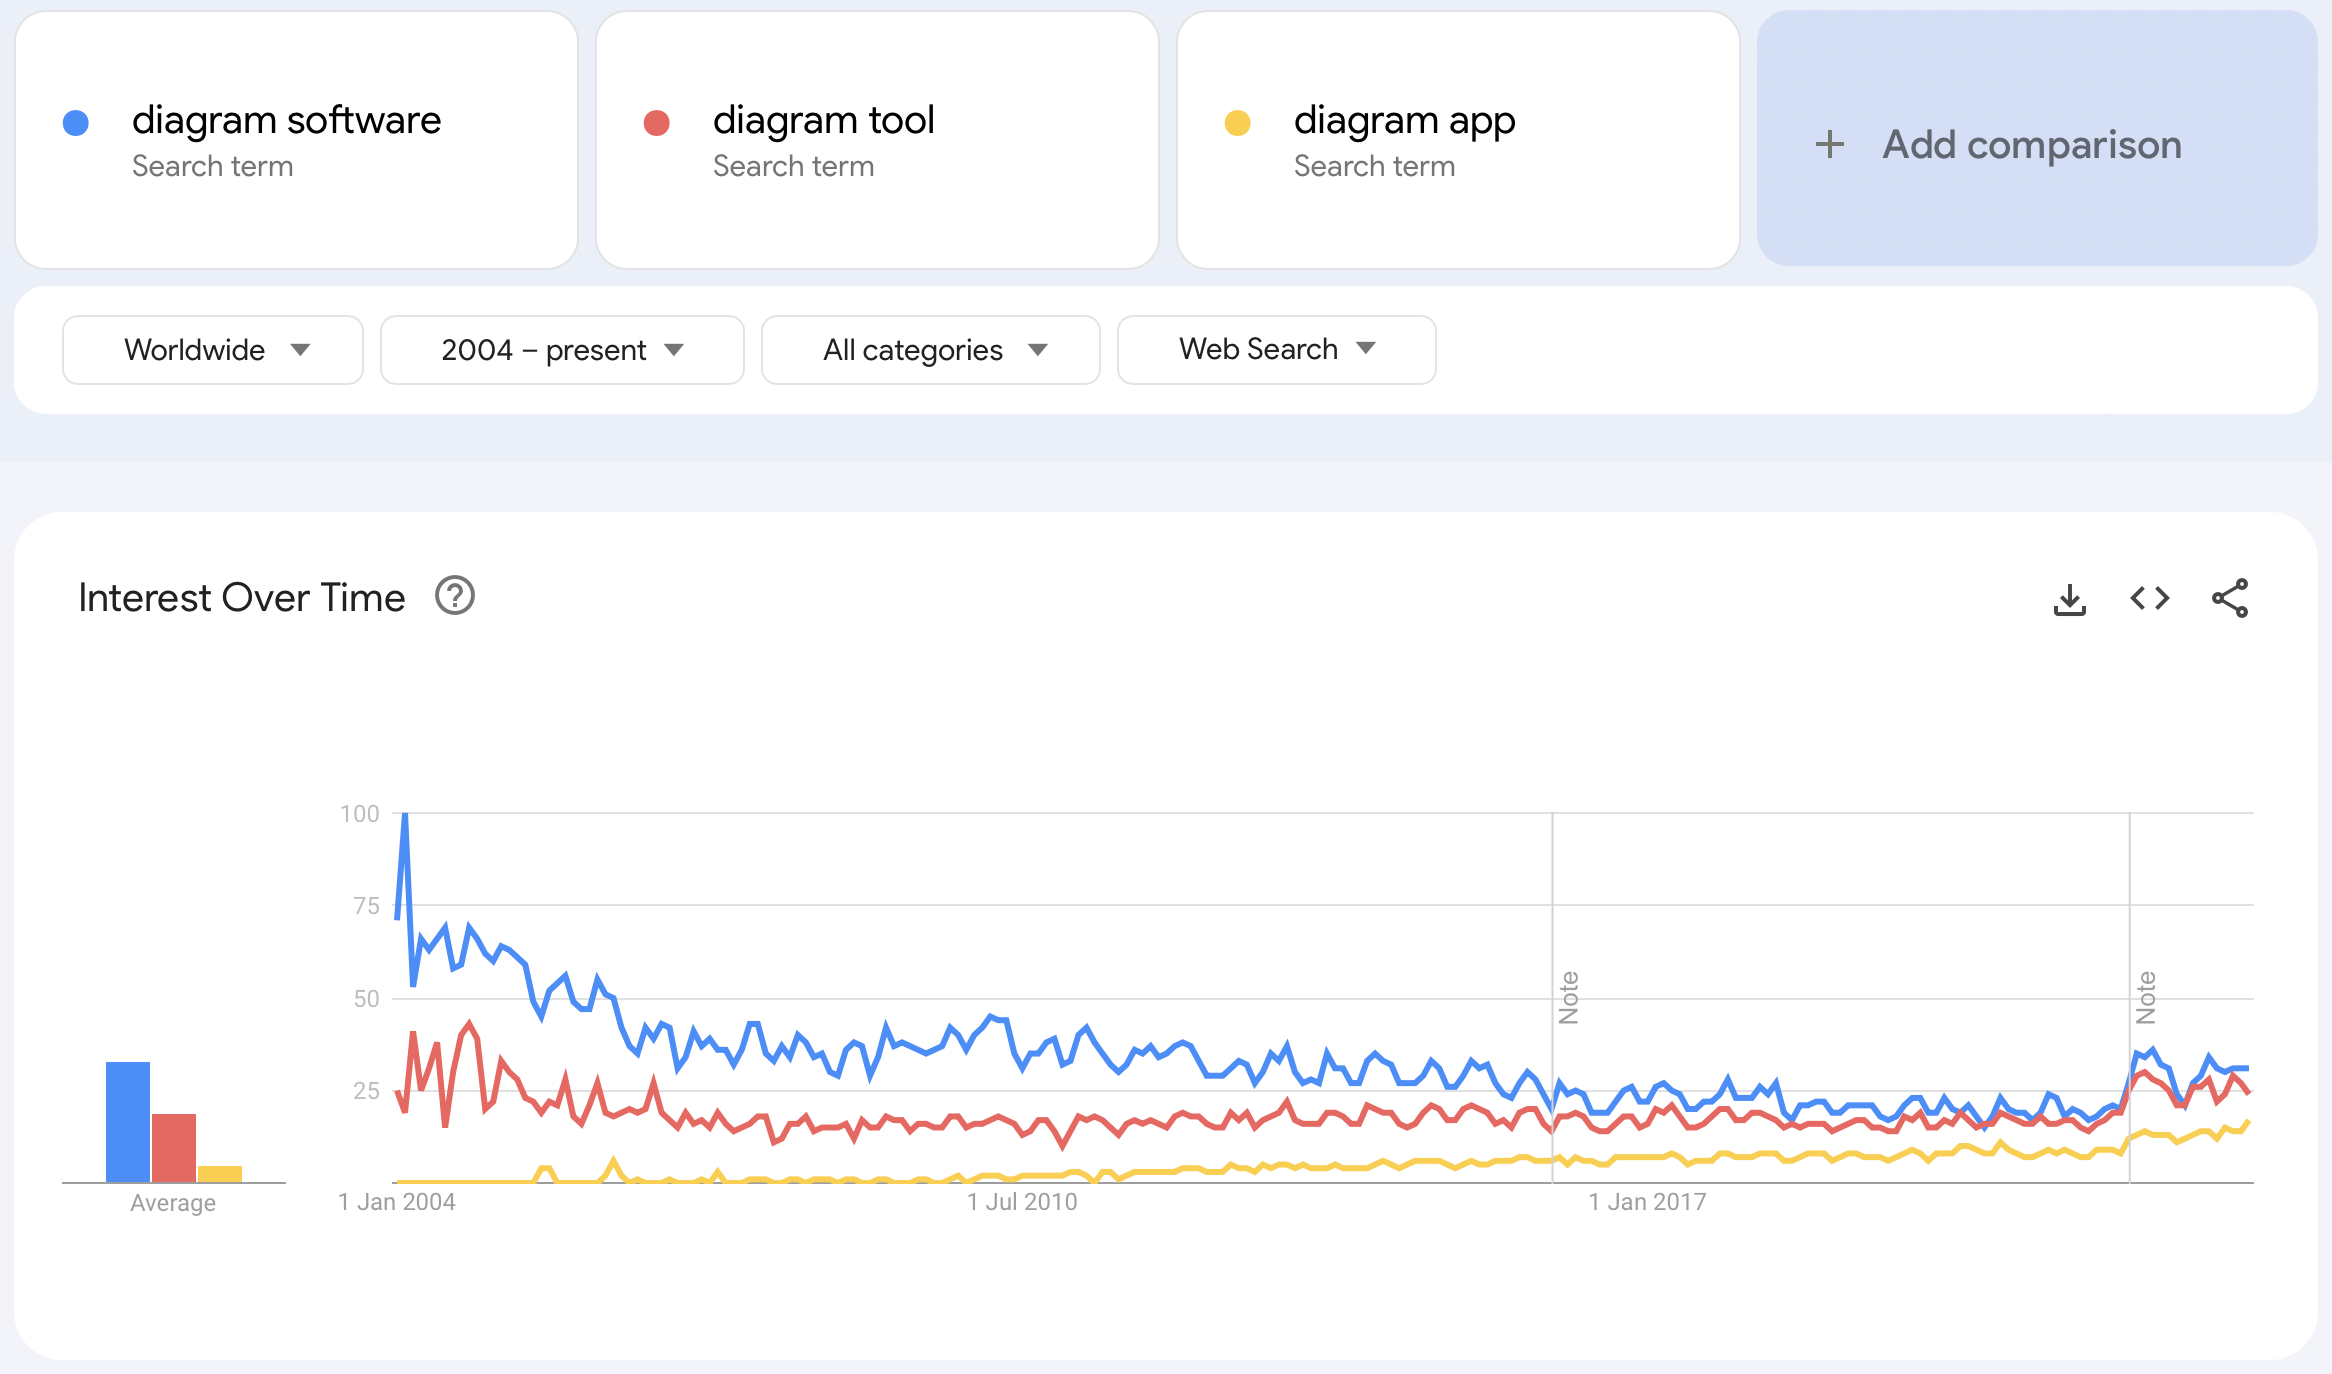 Software, tool or app - which is most often used when searching for something to draw a diagram with?